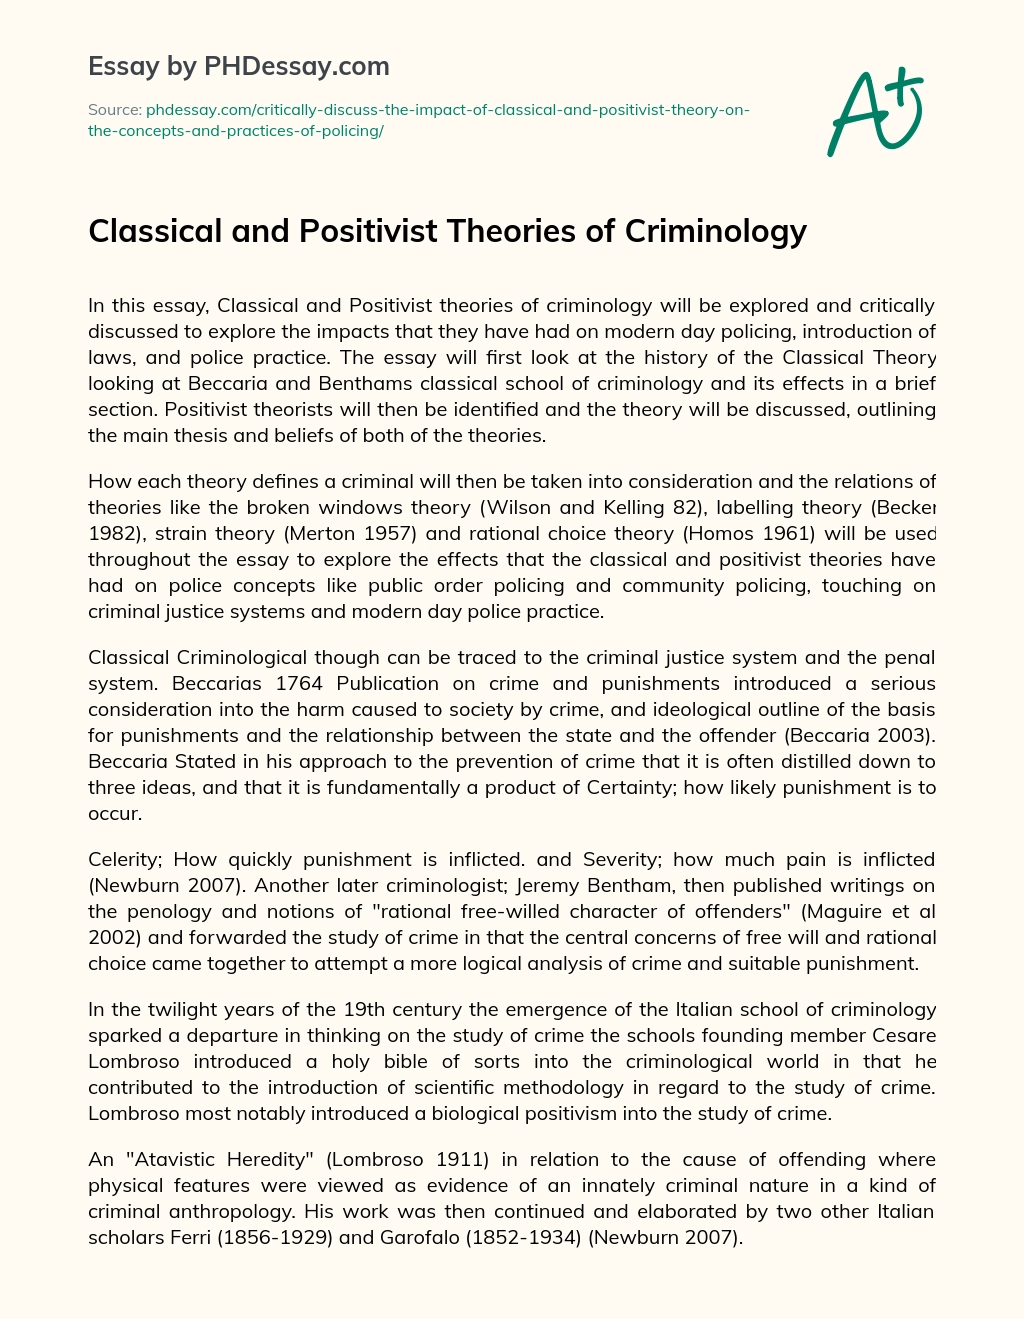 Classical and Positivist Theories of Criminology essay